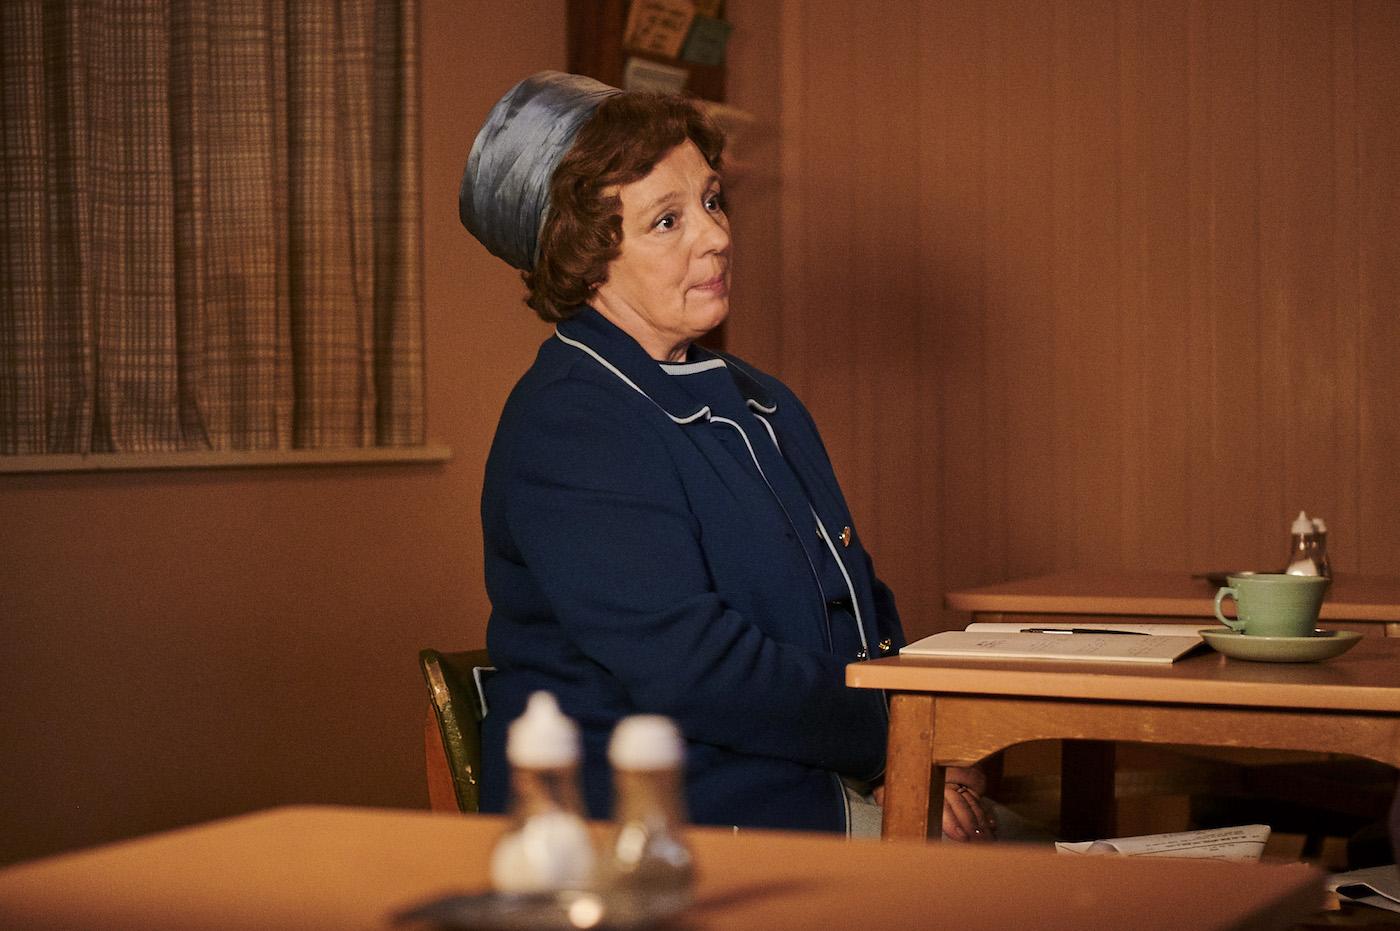 Violet in 'Call the Midwife.' Photo: BBC / Neal Street Productions